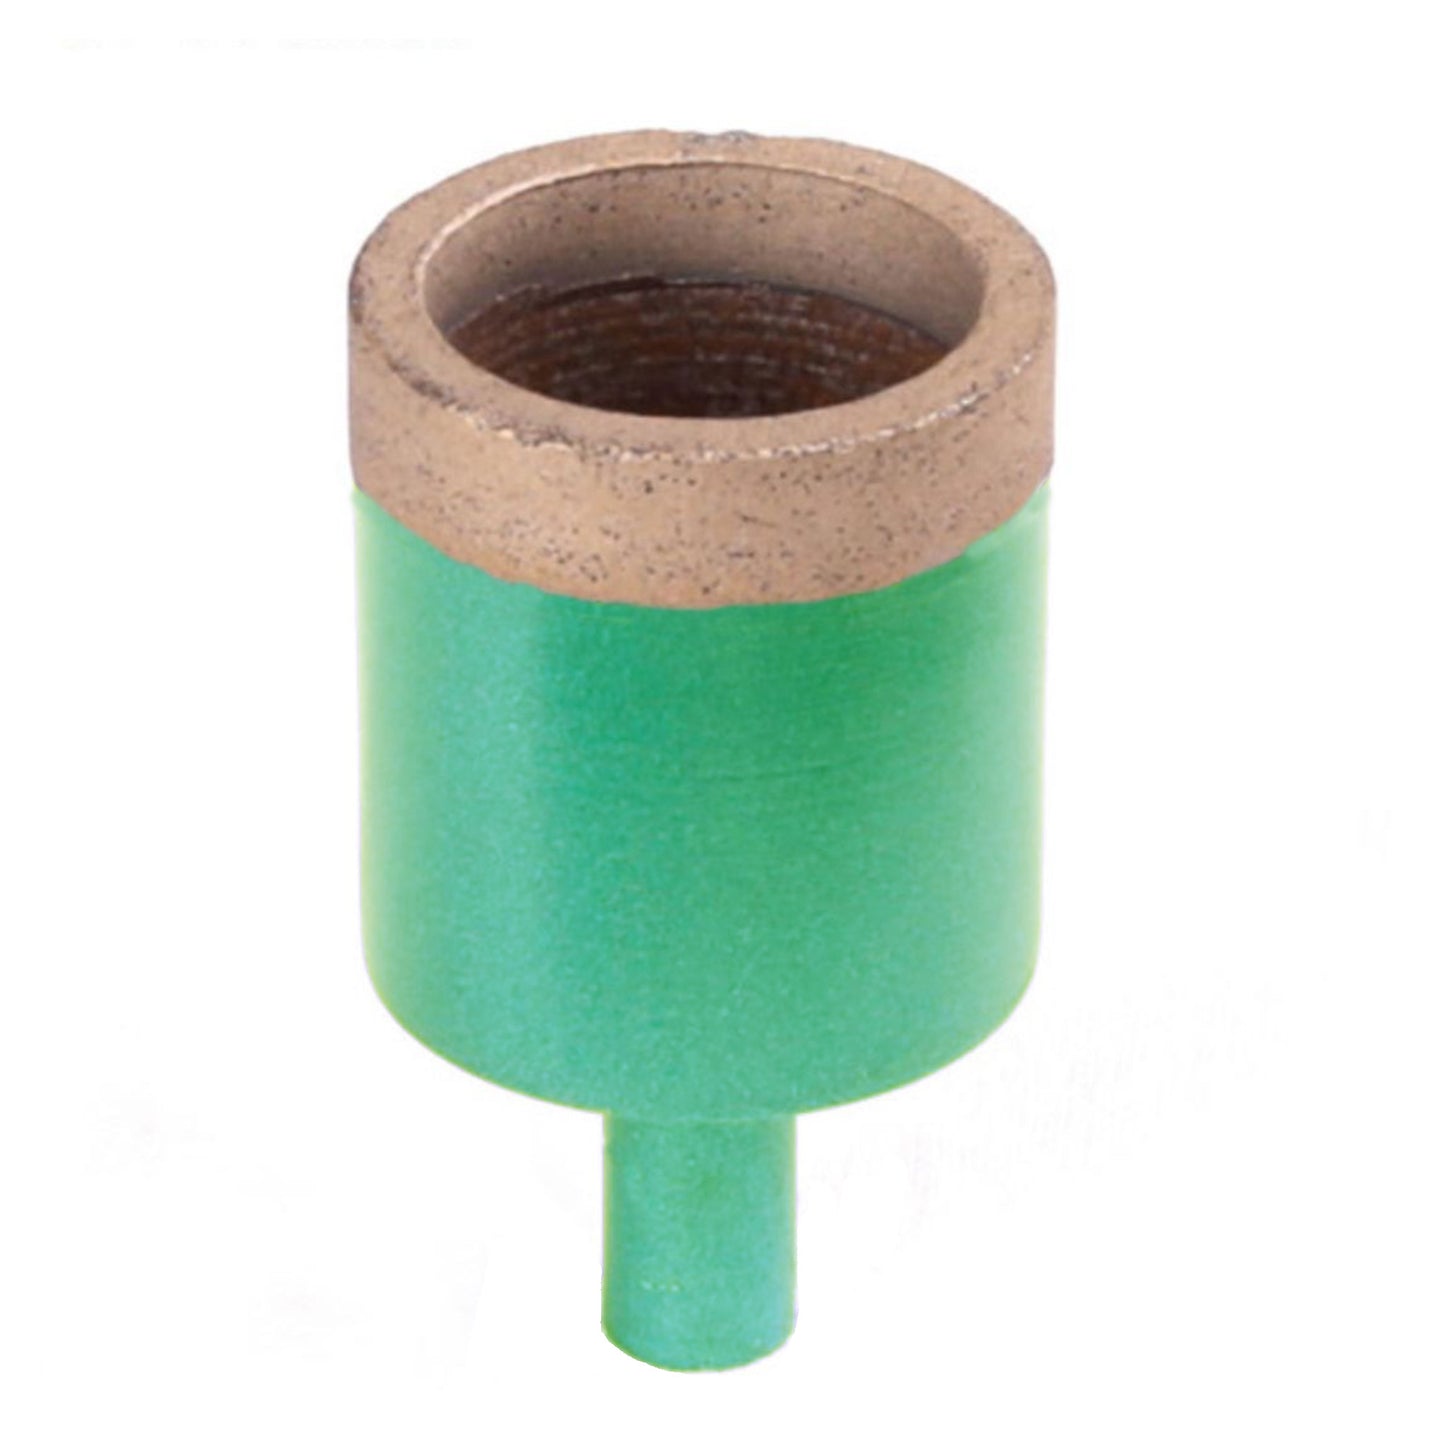 15mm - Grinding Cup